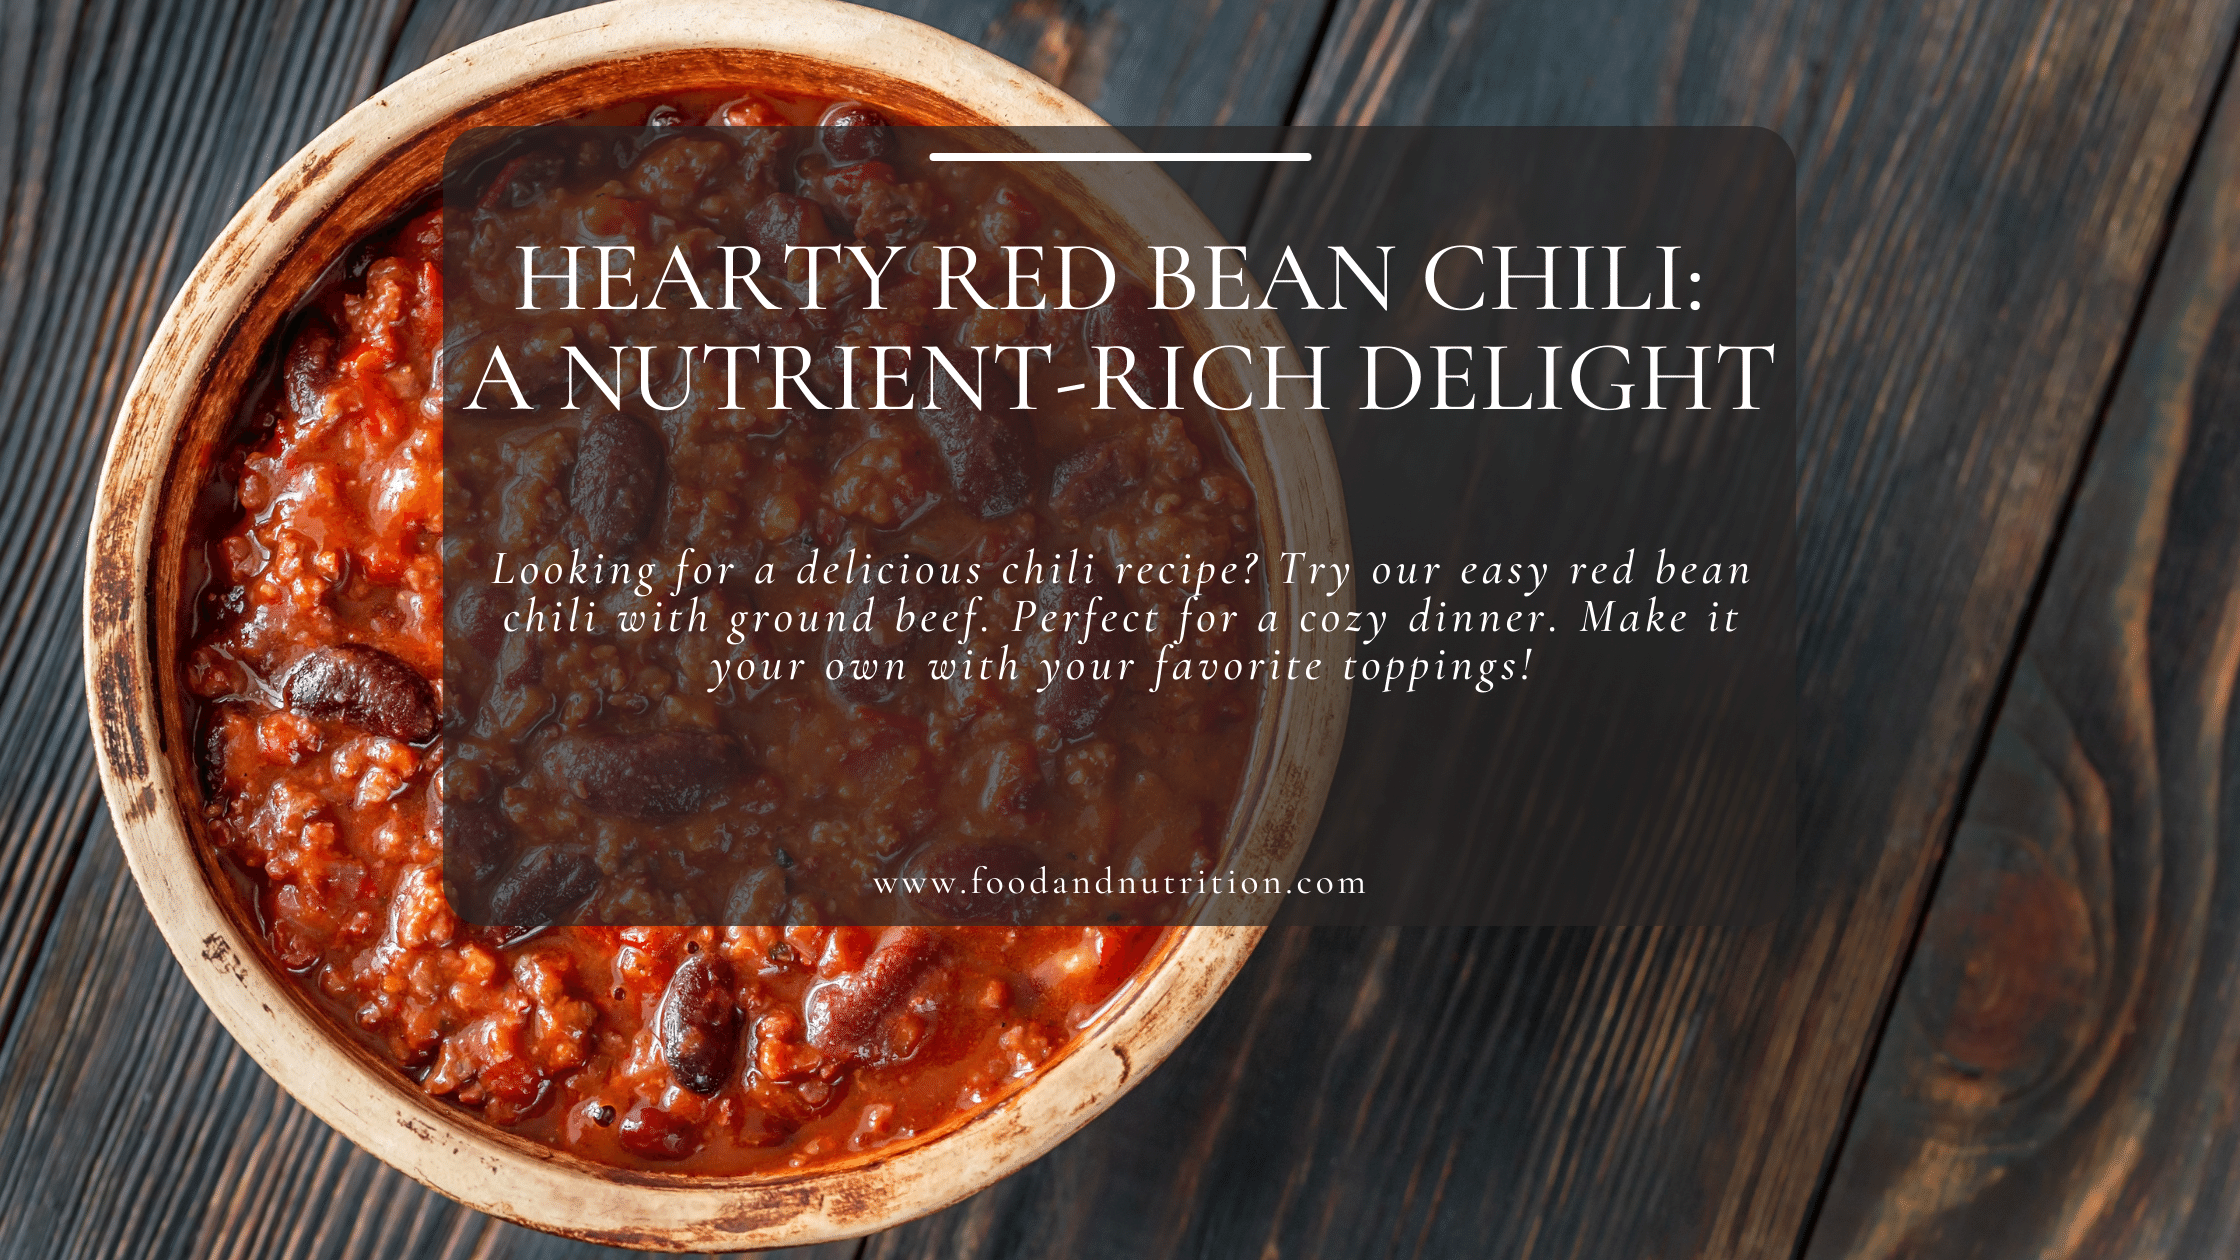 Hearty Red Bean Chili: A Nutrient-Rich Delight